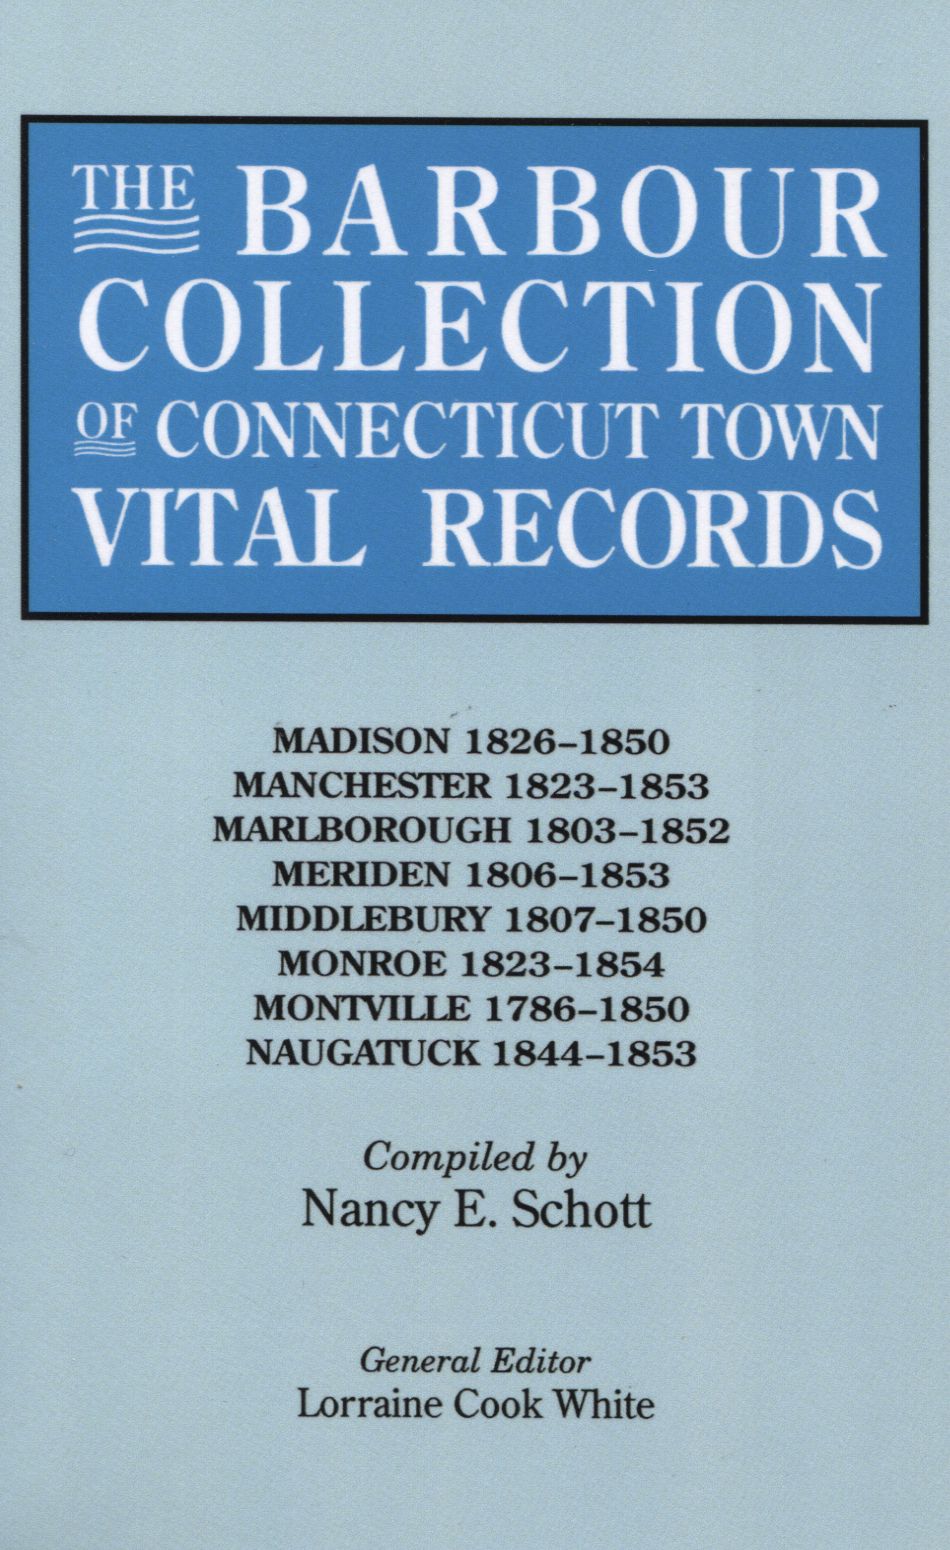 The Barbour Collection of Connecticut Town Vital Records [Vol. 25]